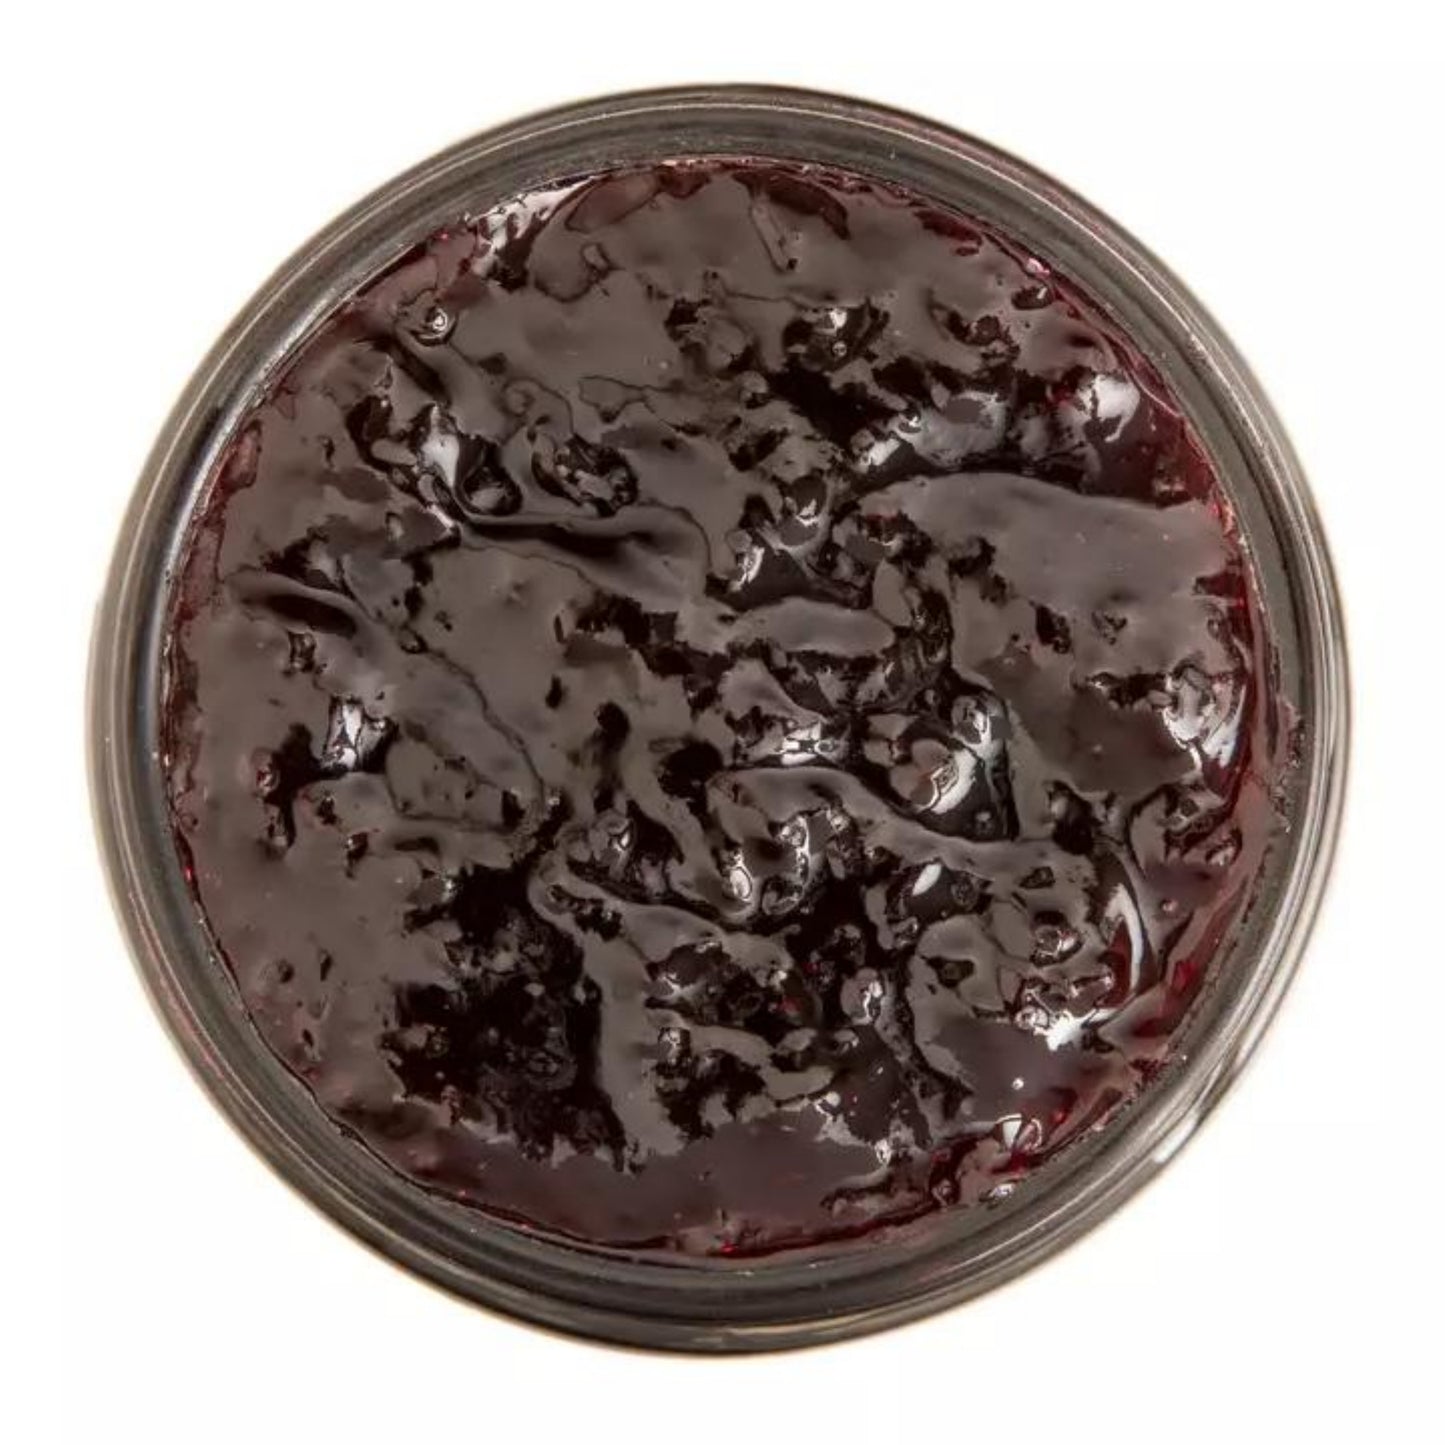 Botanical Jam Collection- Black Currant with Wild Mint Open Jar 